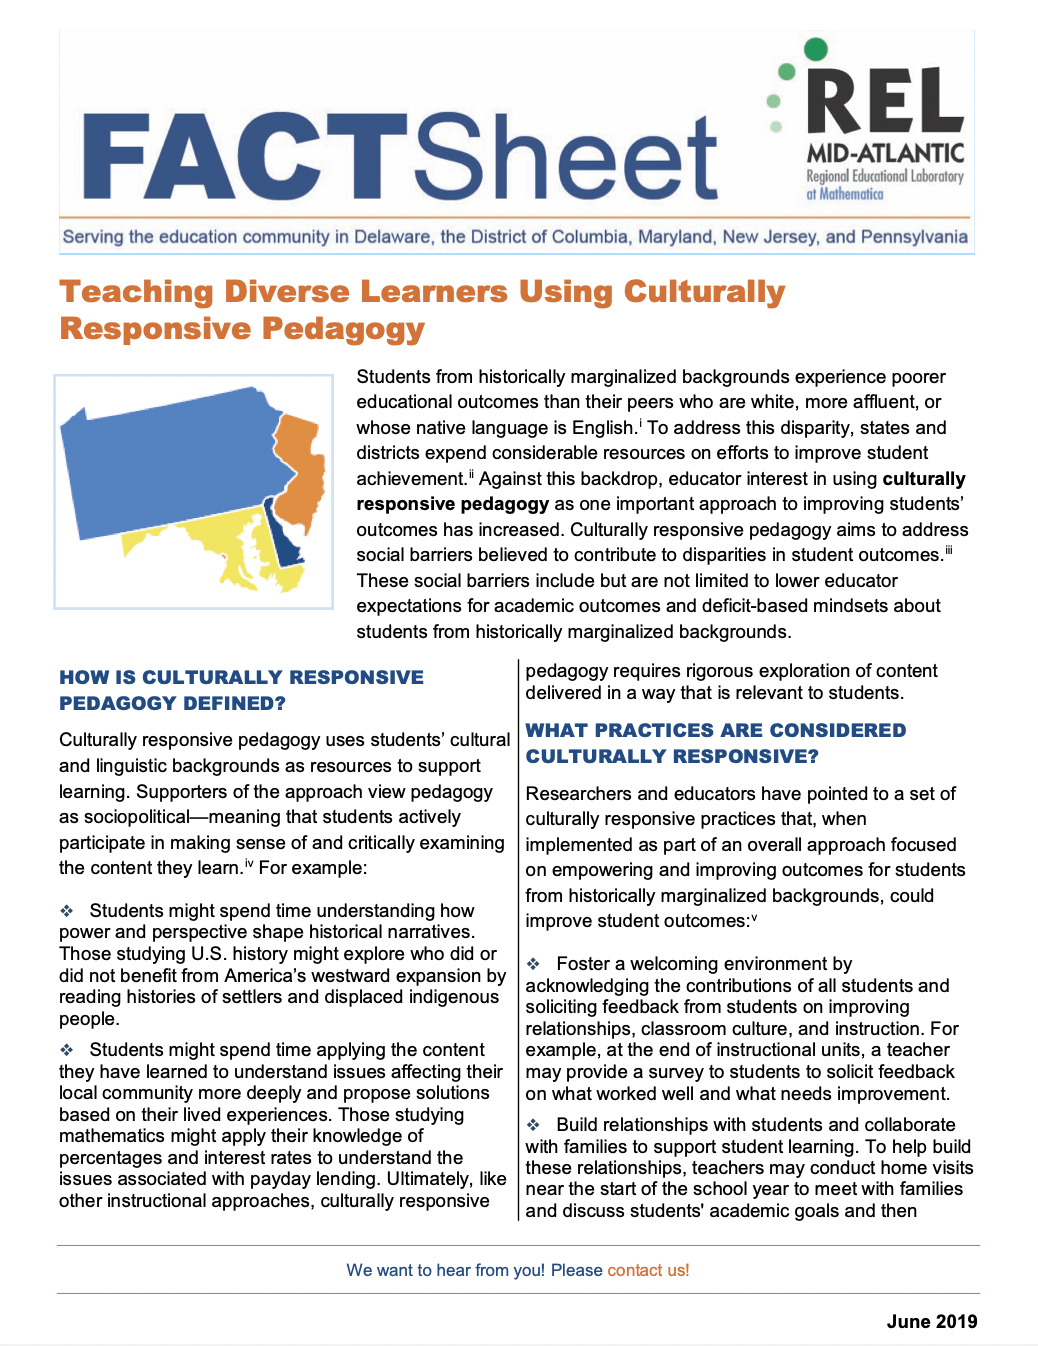 Teaching Diverse Learners Using Culturally Responsive Pedagogy